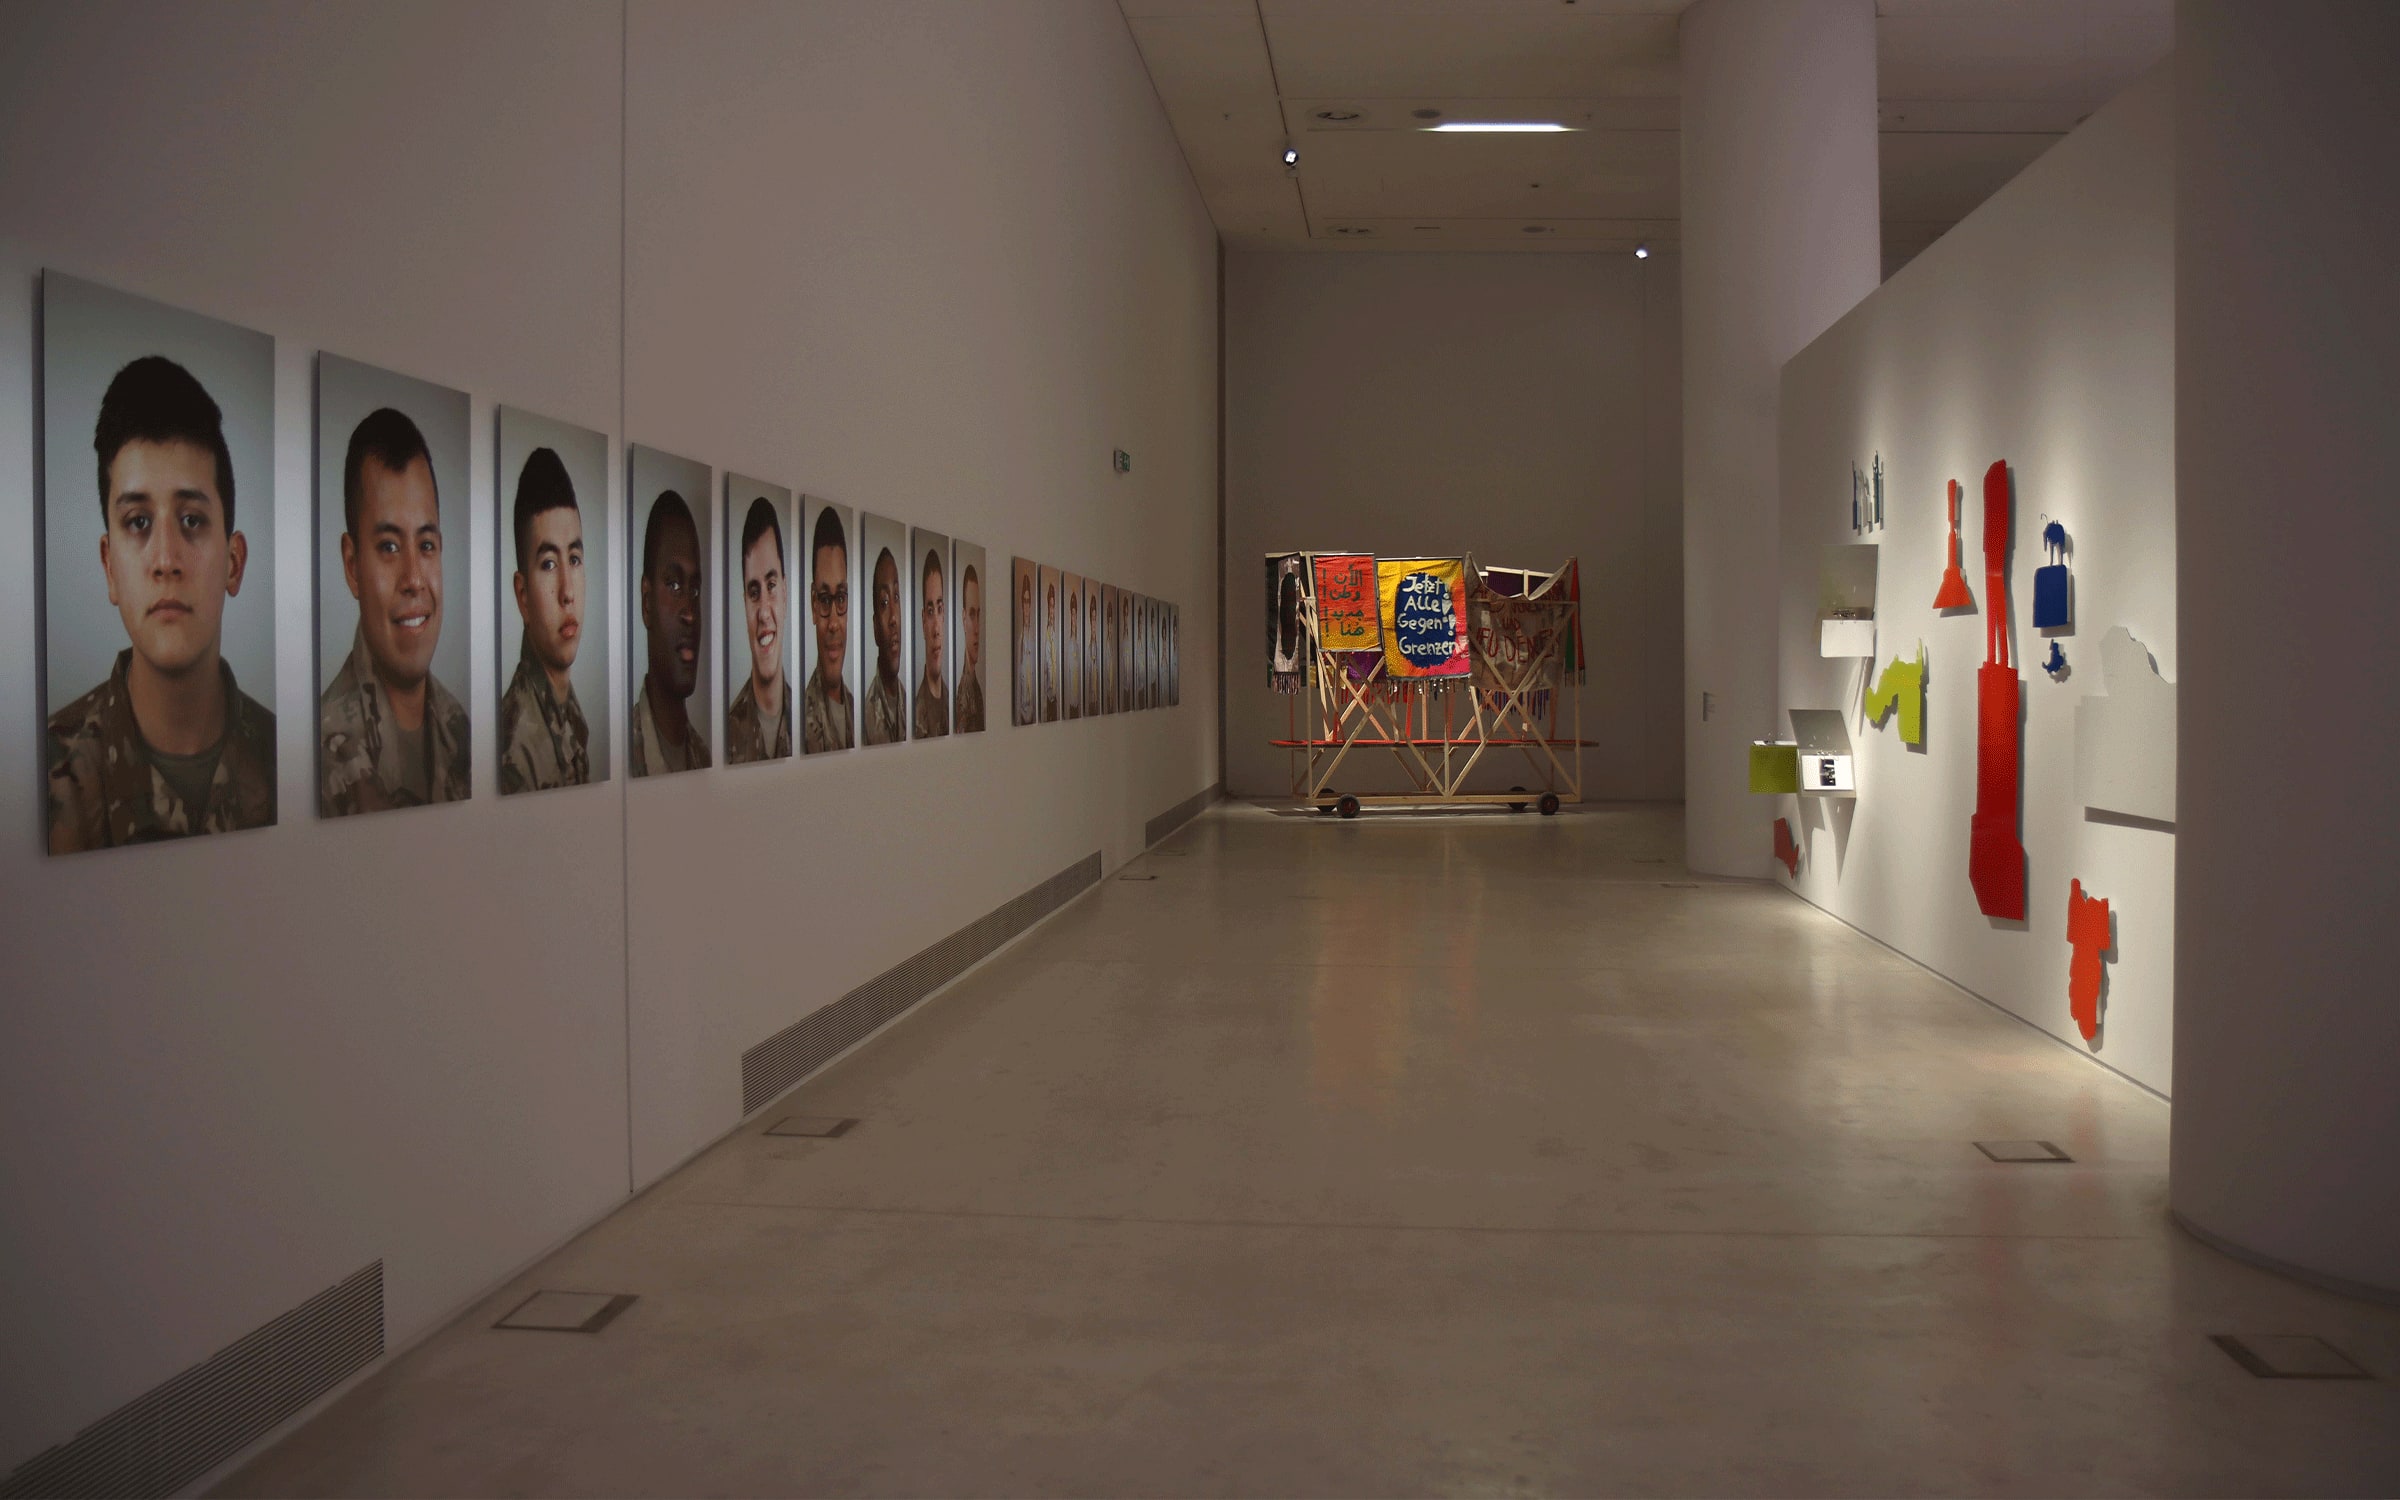 Installation view of exhibition 'Statecraft (And Beyond)' at EMST, National Museum of Contemporary Art, Athens, 2022. Photograph by Anna Primou.